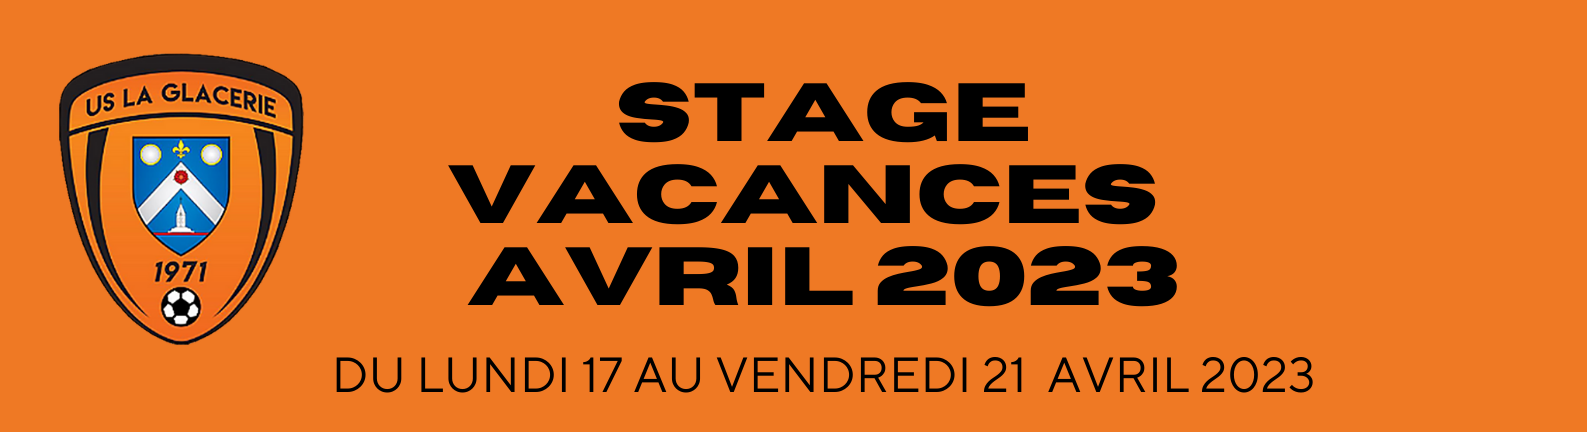 STAGE VACANCES AVRIL 2023!